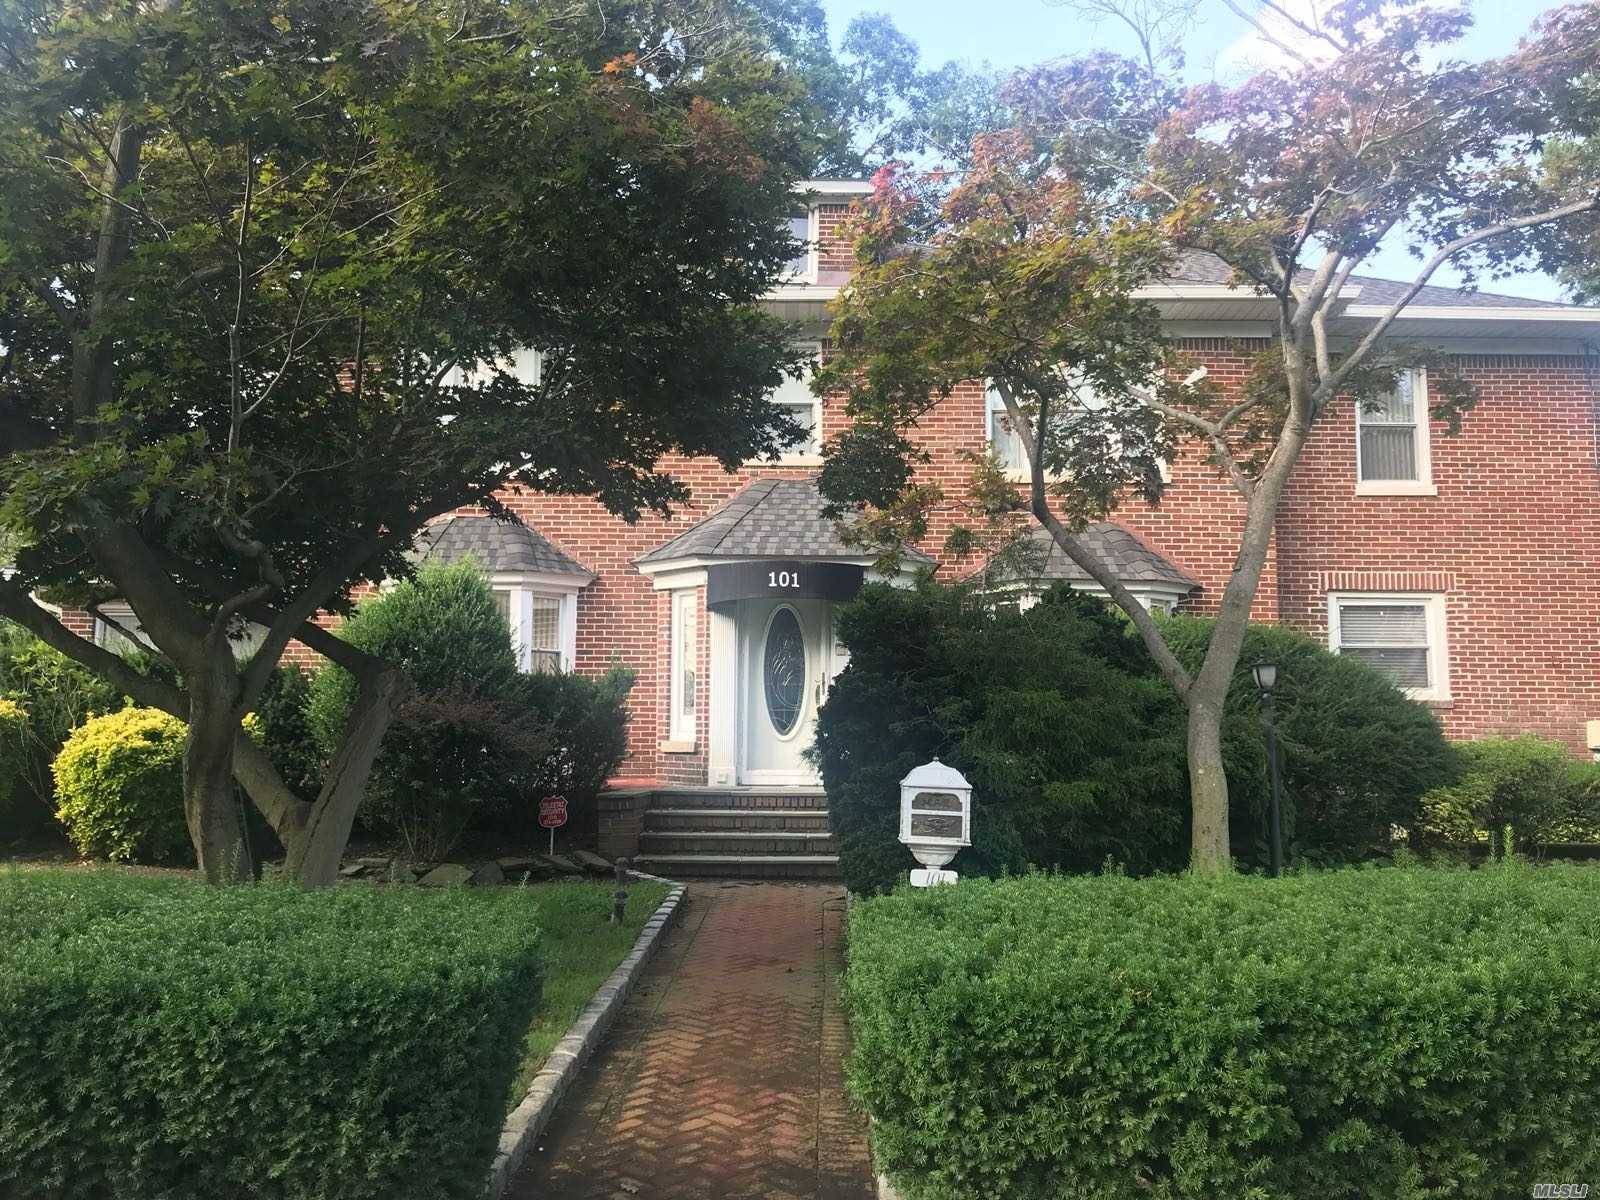 Short Term 6 Months Rental Of Brick Center Hall Colonial In The Center Of The Tree-Street Area In Woodmere.